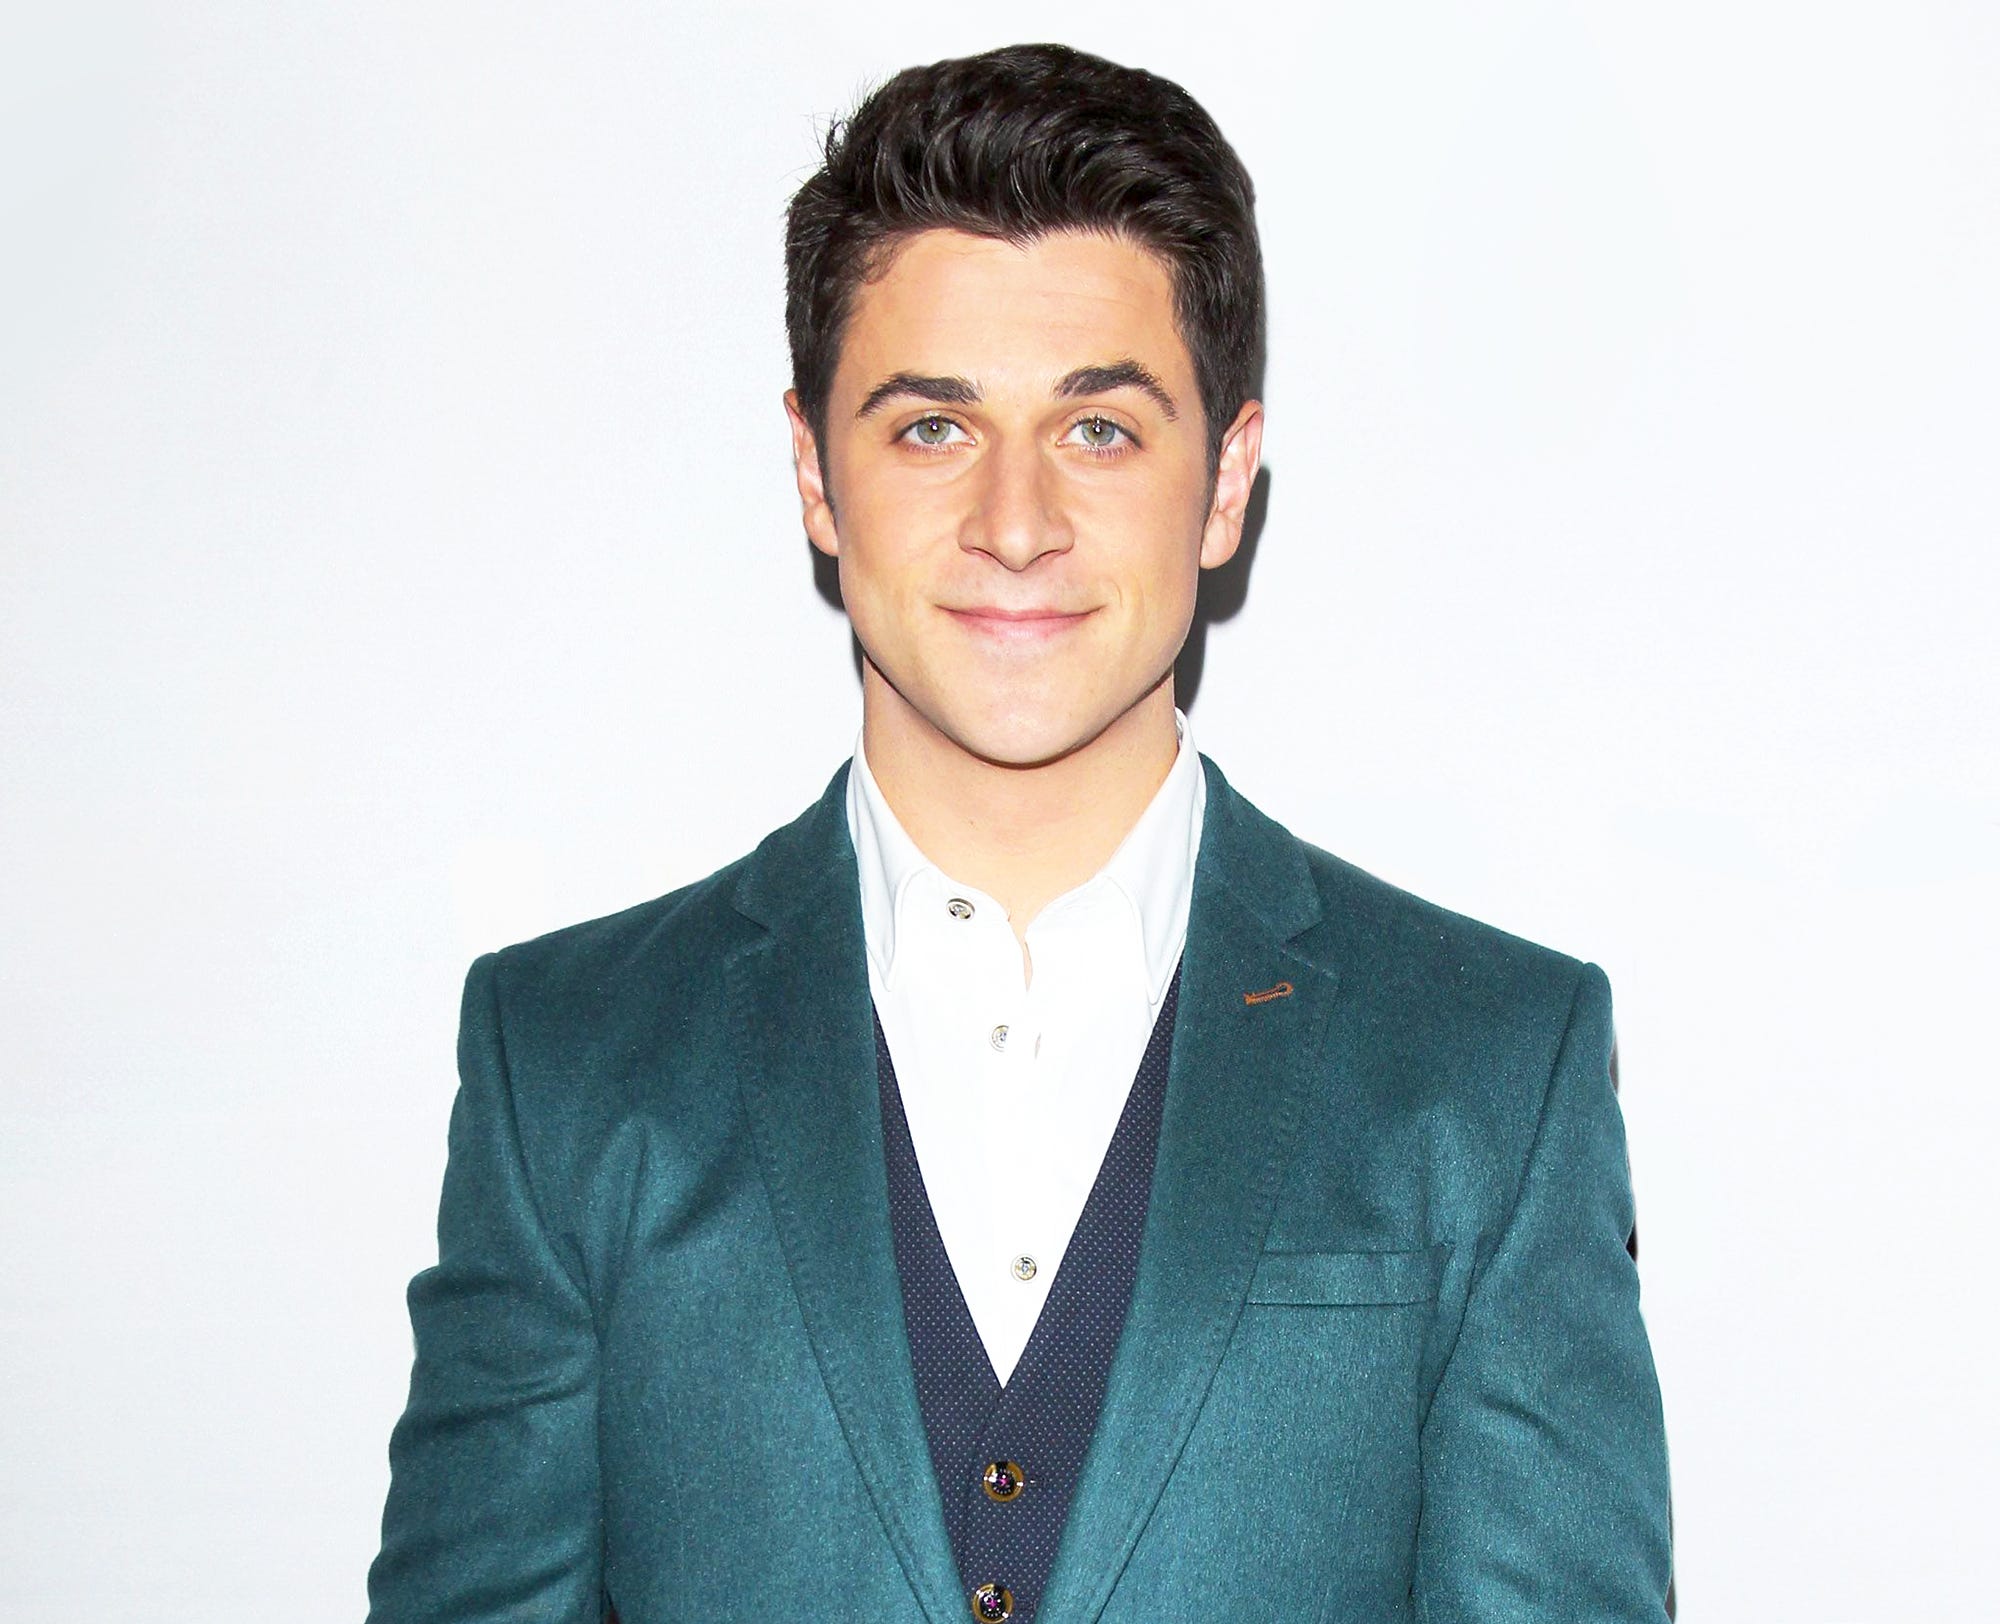 Wizards Of Waverly Place Actor David Henrie Was Reportedly Arrested